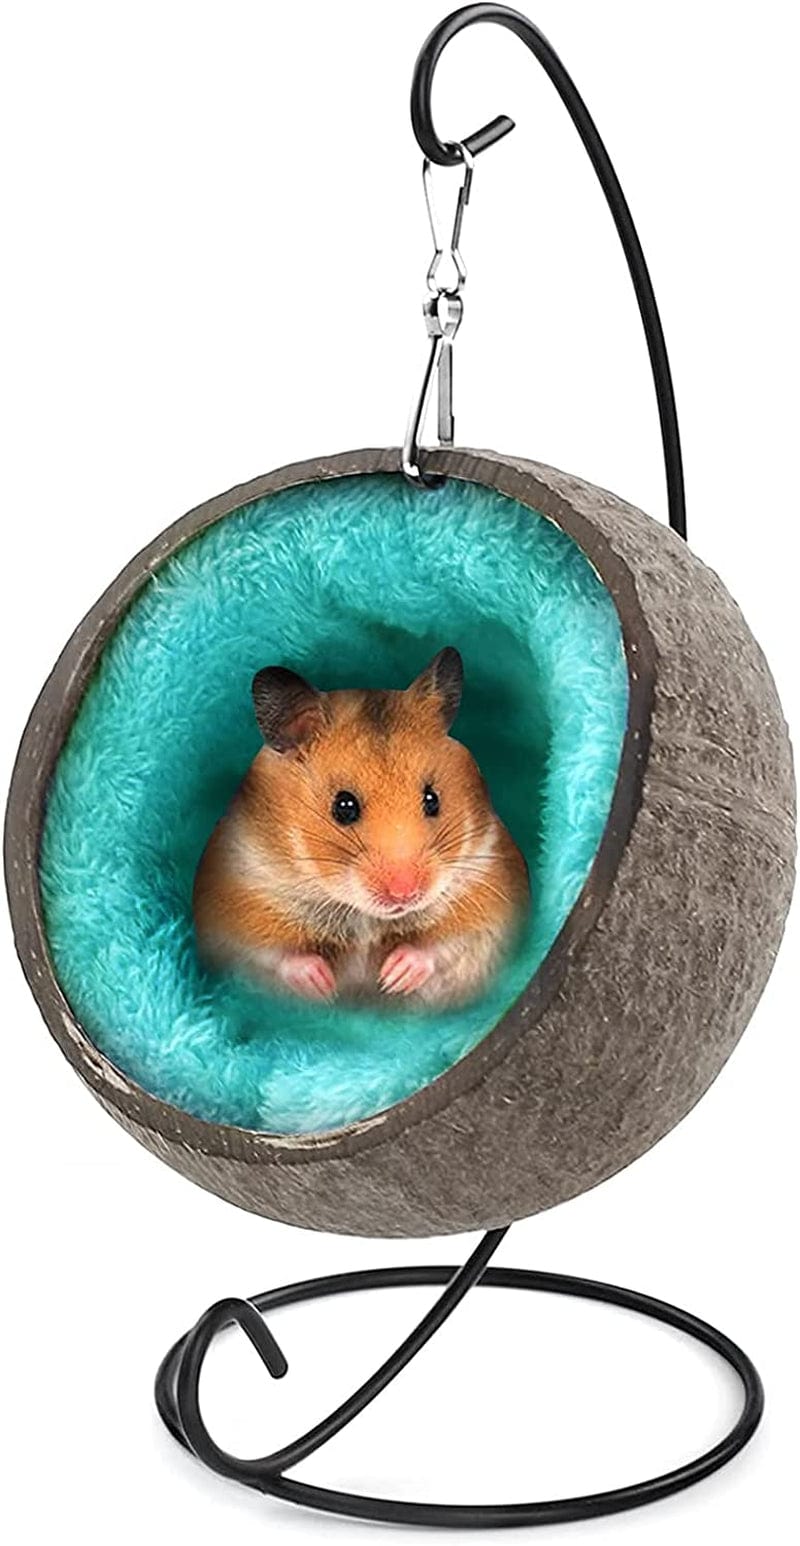 Natural Coconut Hamster Hideout Hammock, Suspension Coconut Husk Hamster Bed House with Warm Pad, Hamster Coconut Hideout Small Animal Habitat Decor Accessories Hanging Loop